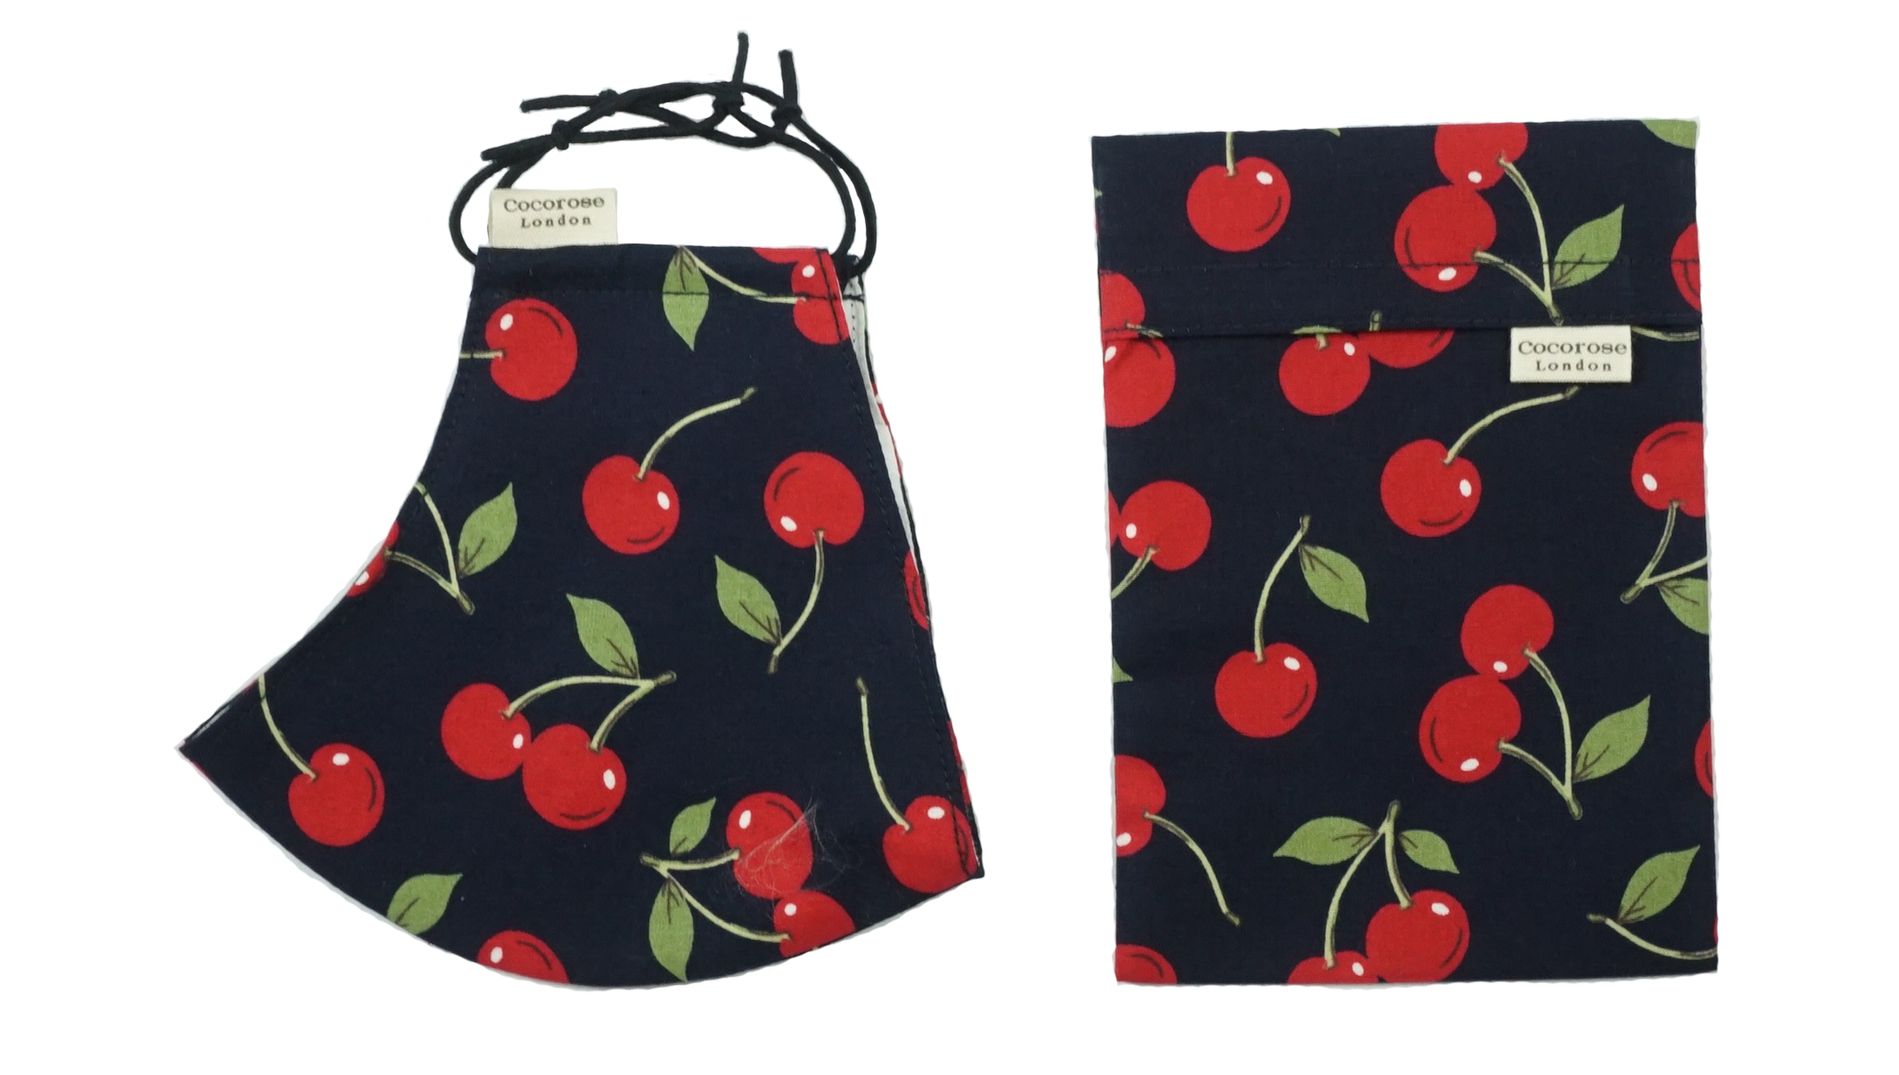 Cherry-patterned cotton sculpted face mask and pouch, from Cocorose London